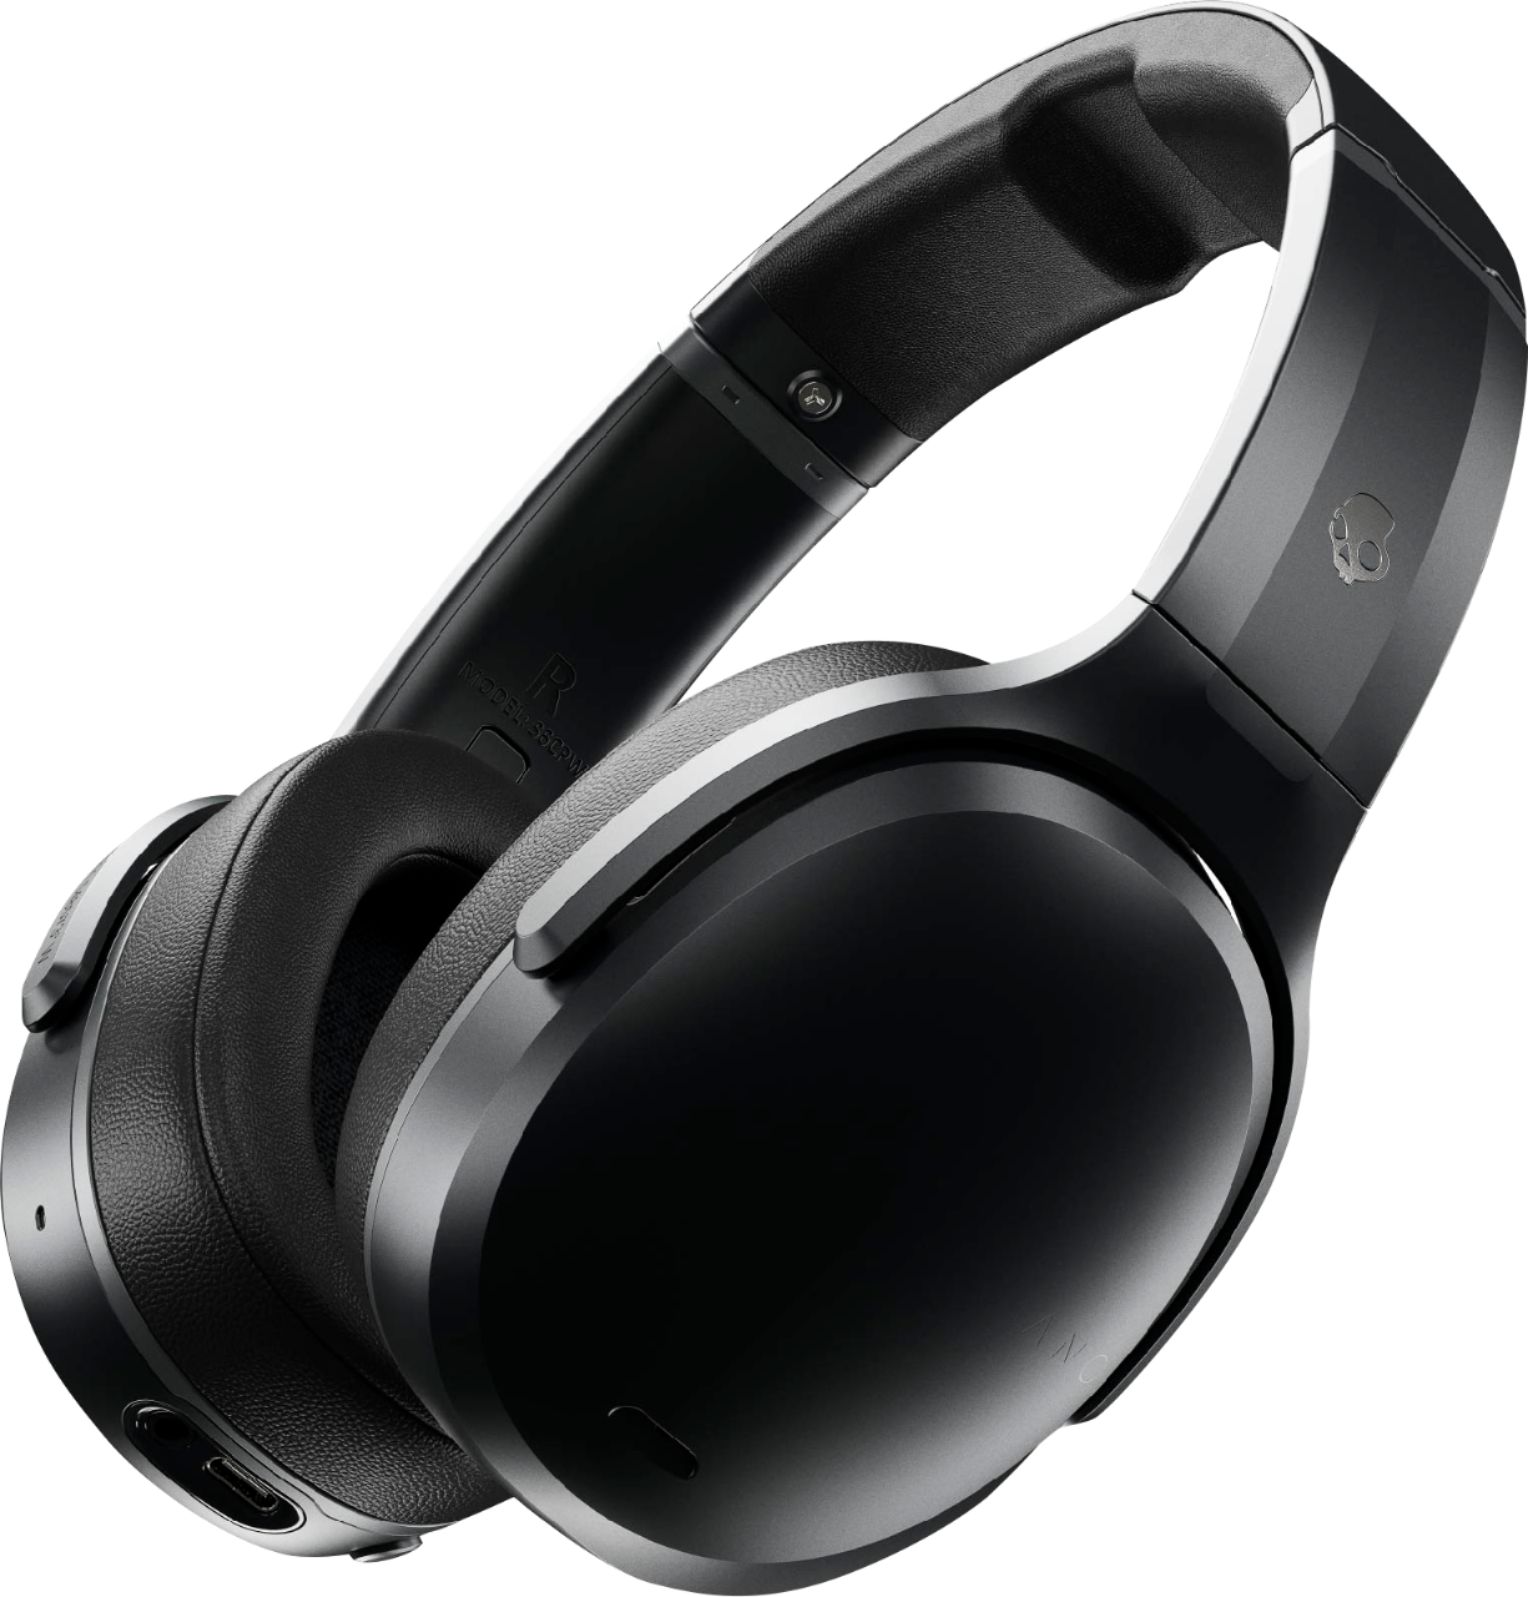 Angle View: Skullcandy - Crusher ANC Wireless Noise Cancelling Over-the-Ear Headphones - Black